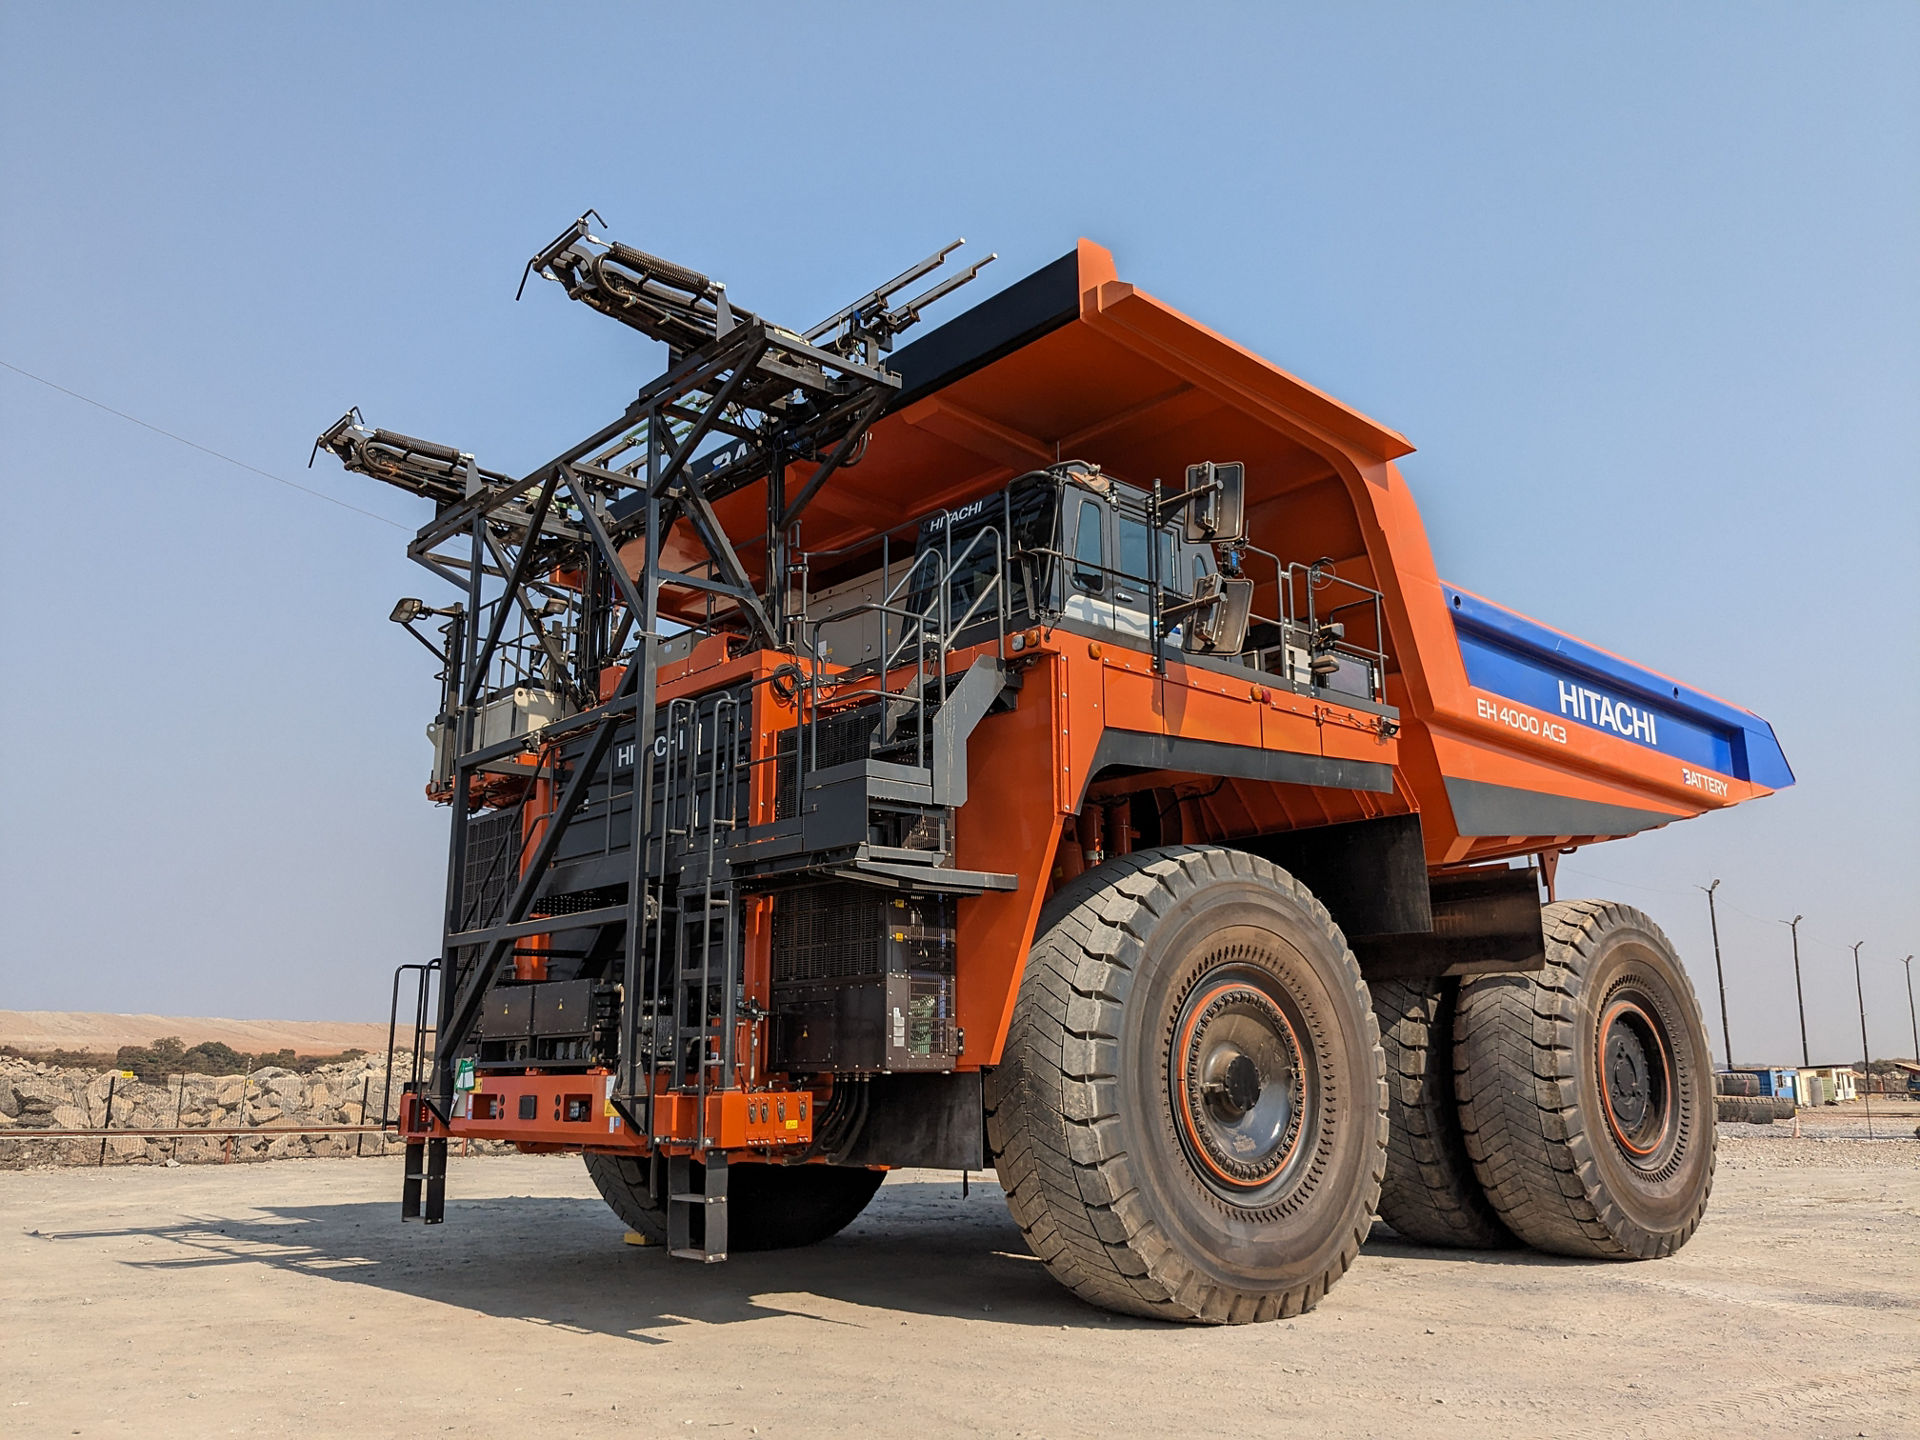 Full battery dump truck in operation at a Zambian mine site